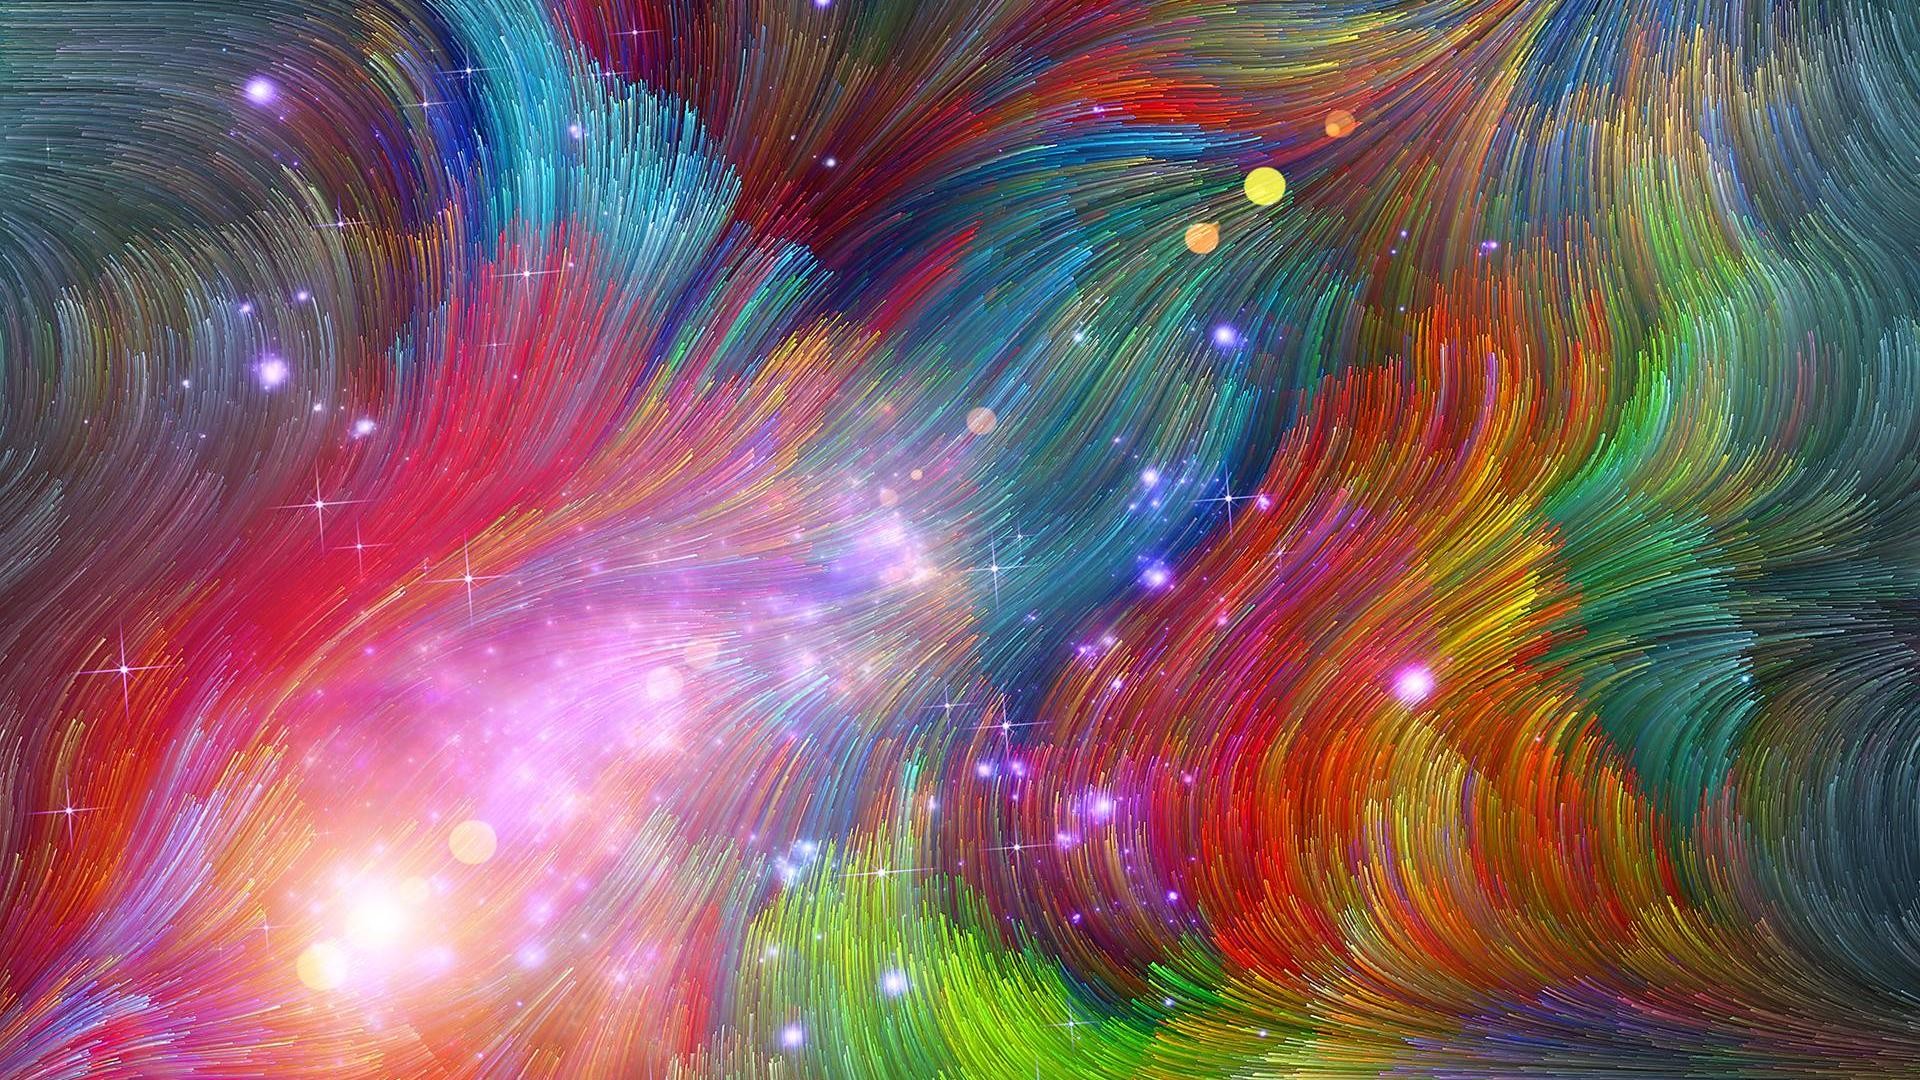 1920x1080 Trippy Galaxy Wallpaper by HD Wallpapers Daily